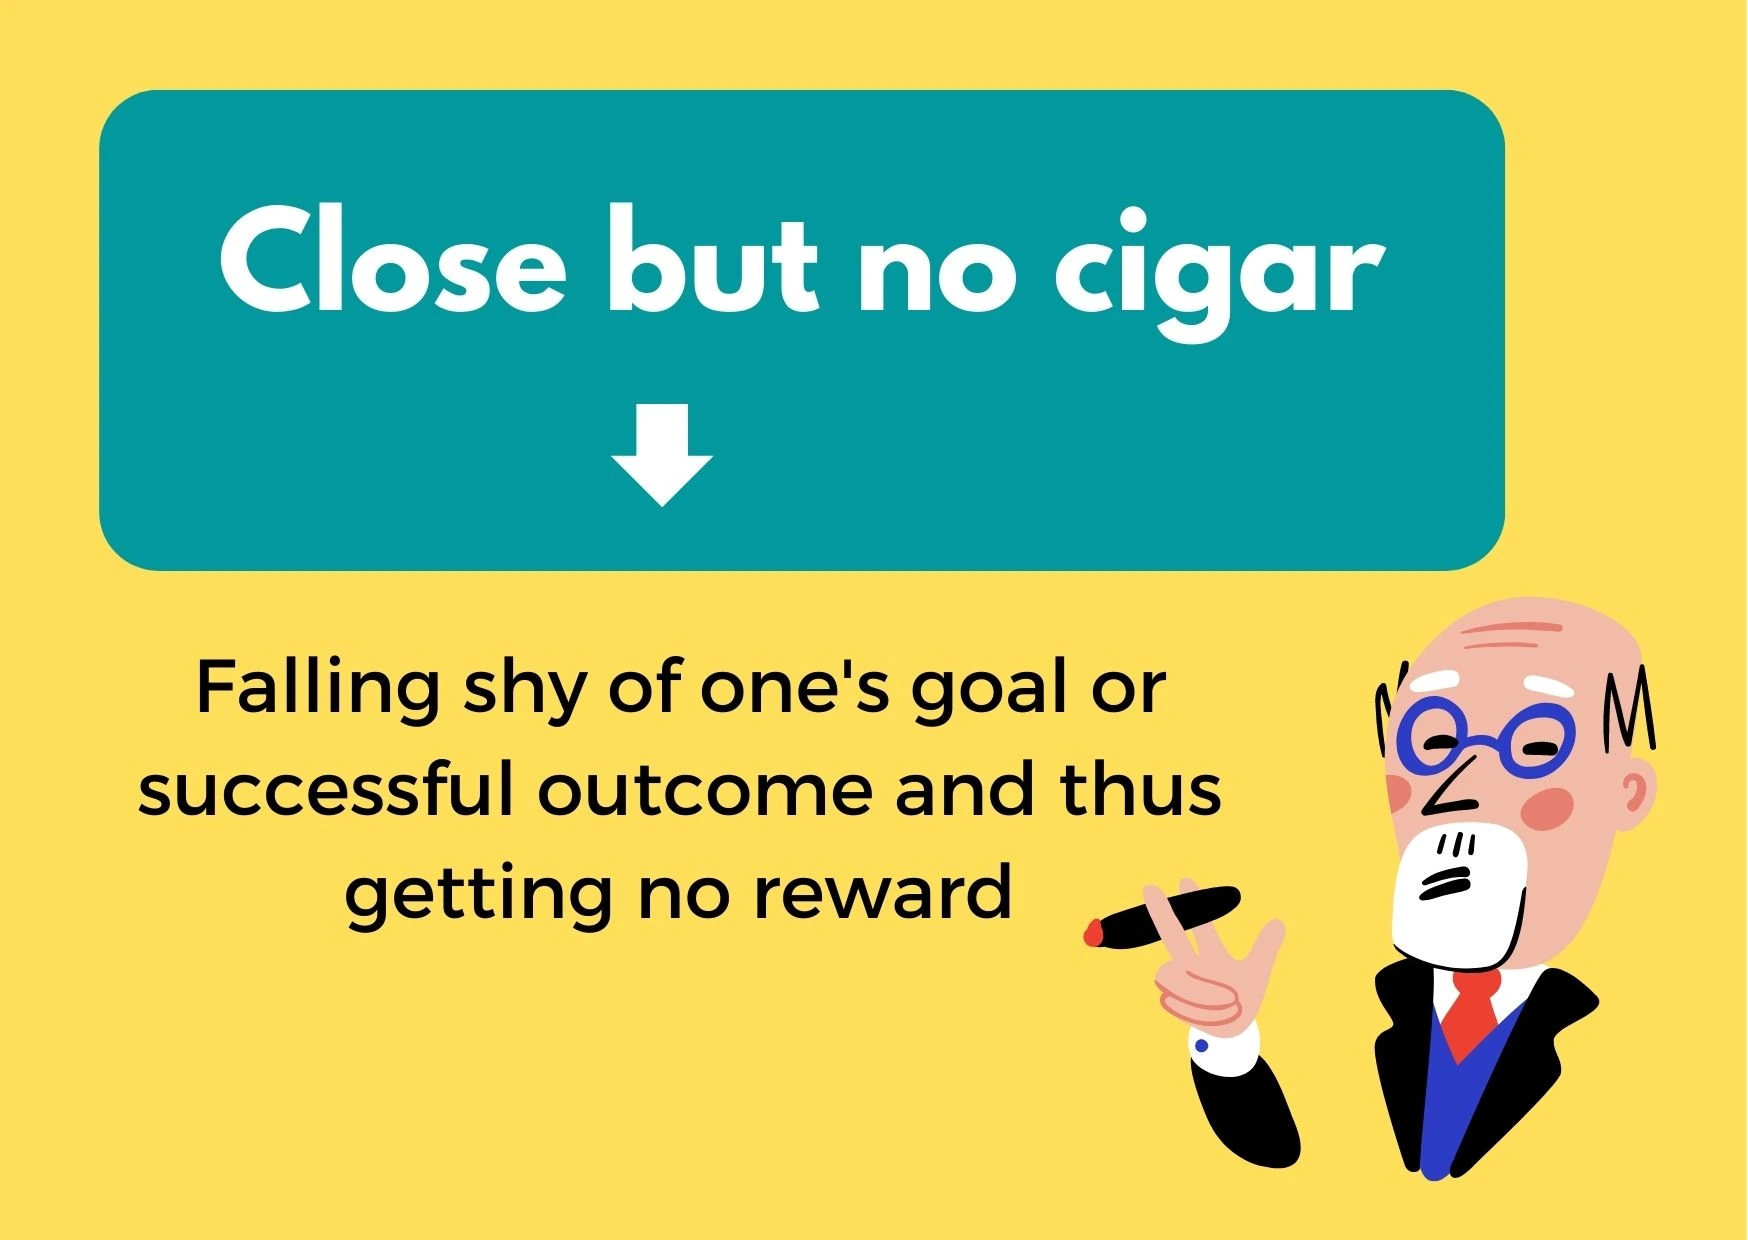 A graphic of an old man holding a cigar with the caption: "Close but no cigar" pointing to an explanation: Falling sky of one's goal or successful outcome and thus getting no reward"